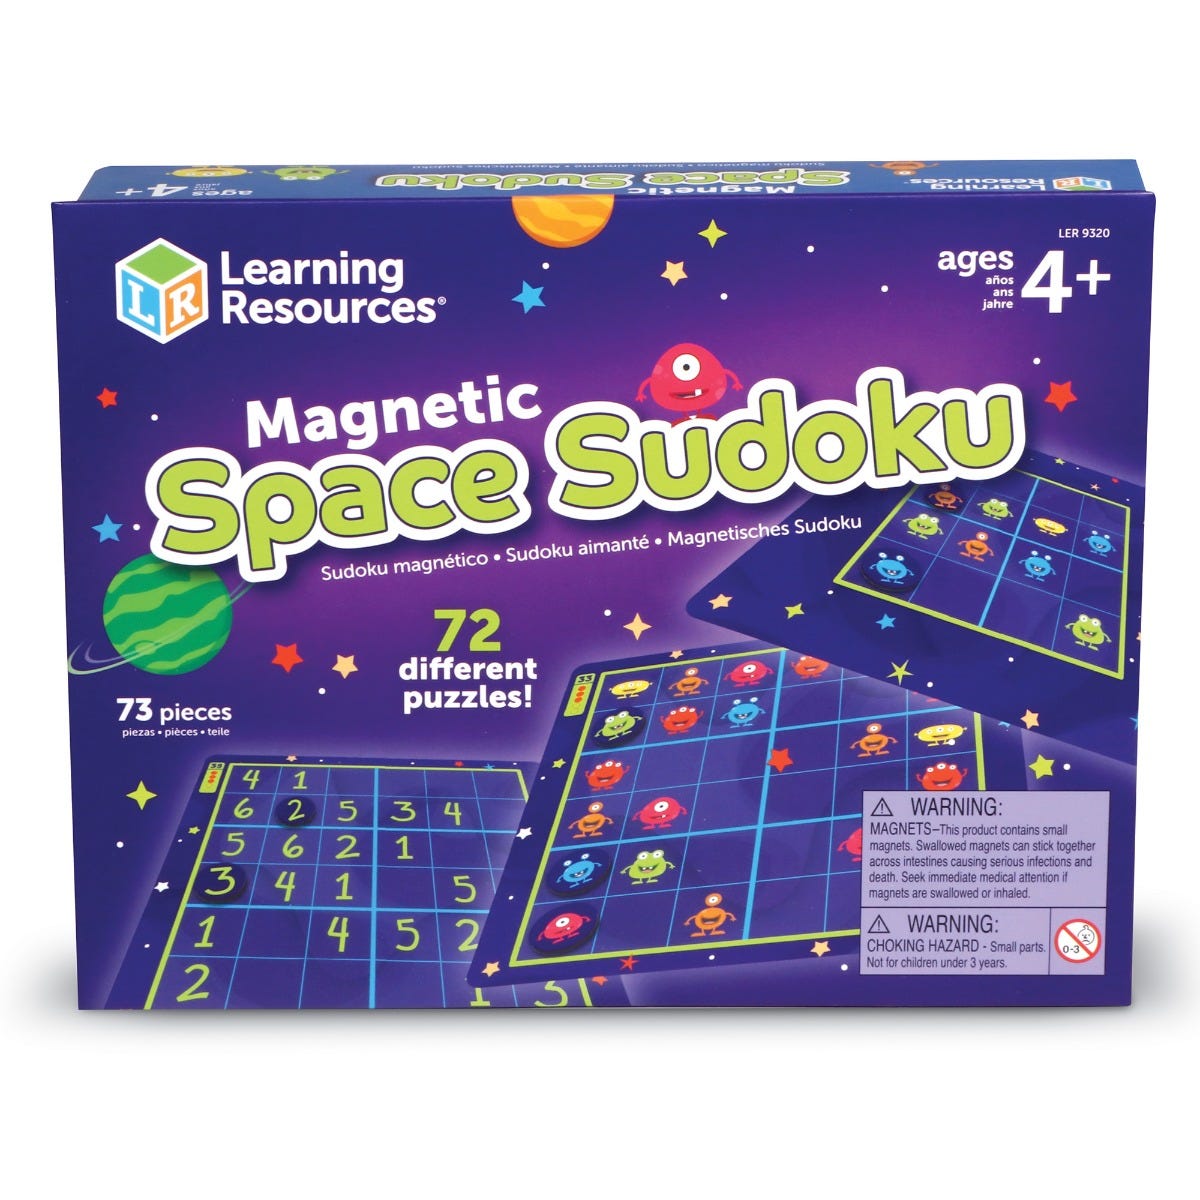 Magnetic Space Sudoku - Learning Resources